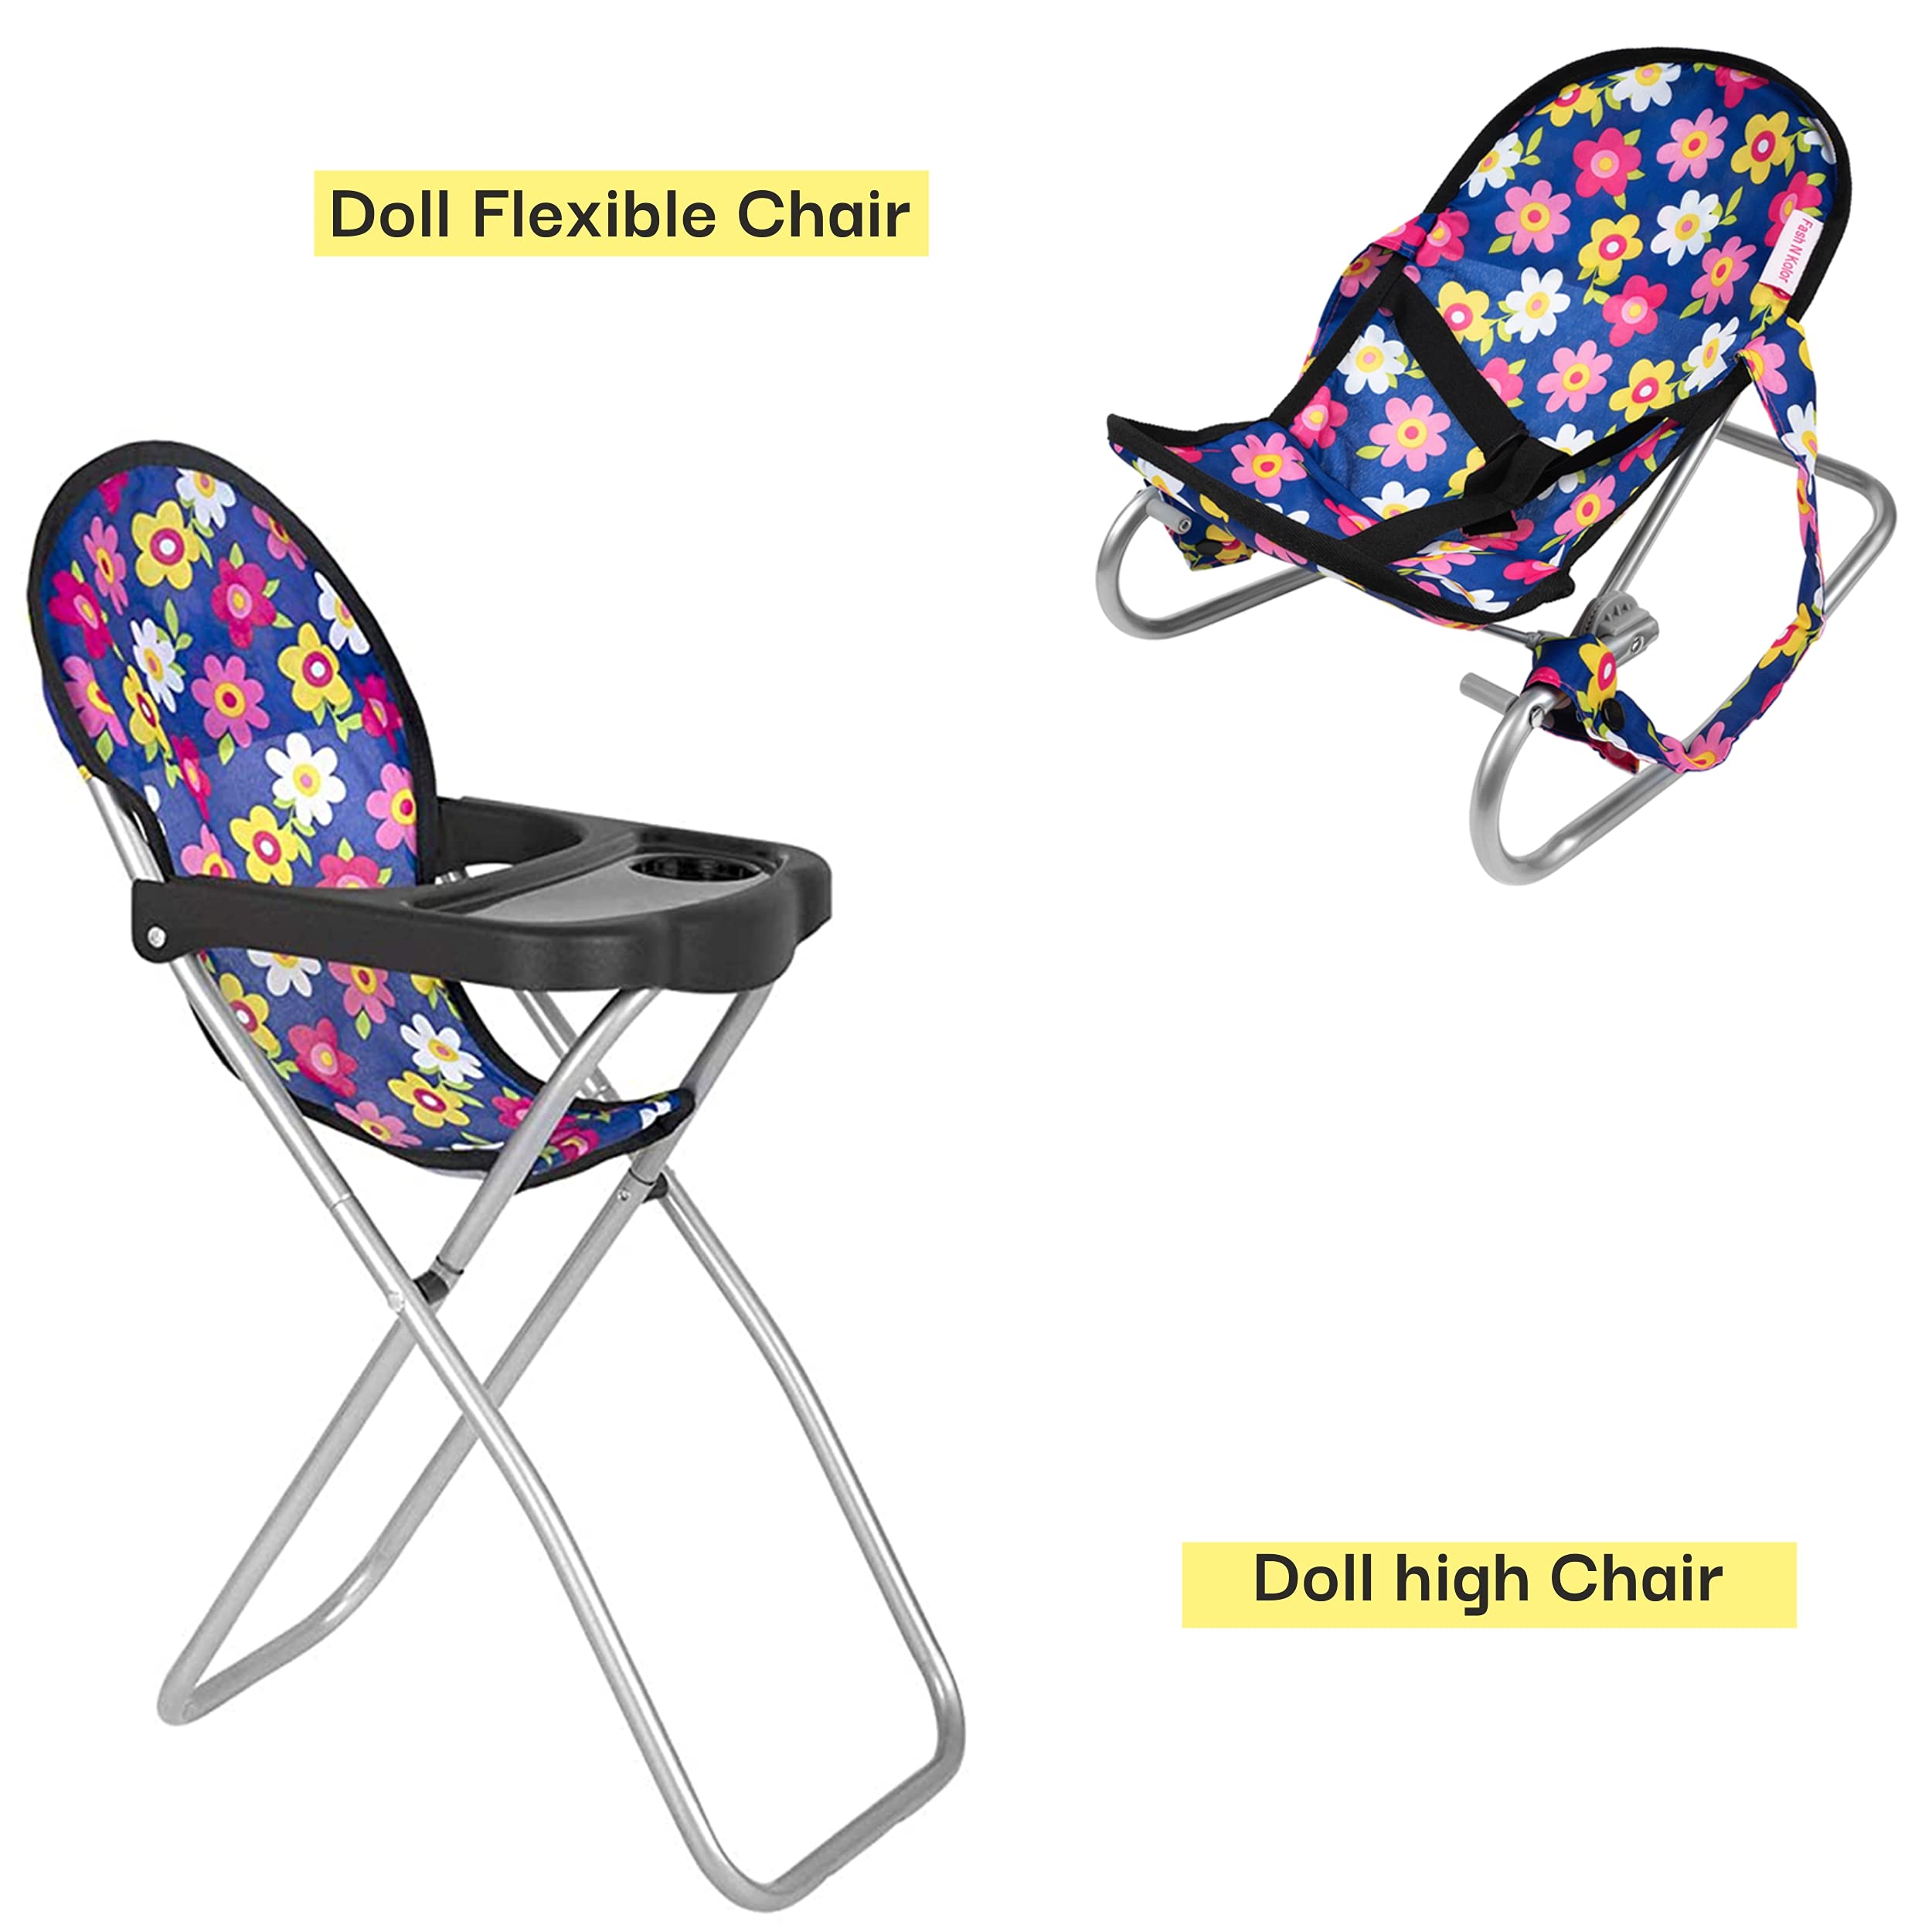 fash n kolor 4 Piece Baby Doll Play Set Flower Design Includes - Pack N Play, Stroller, High Chair, Infant Seat, Fits Up to 18'' Doll 4 Piece Doll Accessories Set